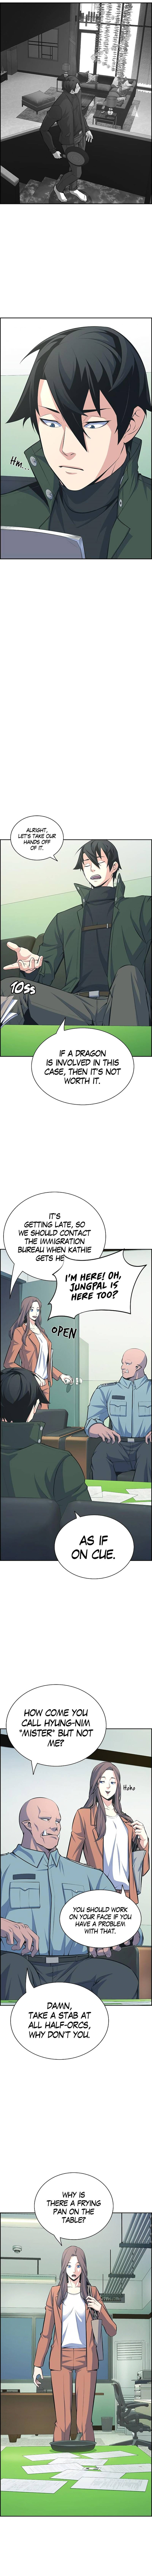 Foreigner on the Periphery Chapter 6 page 6